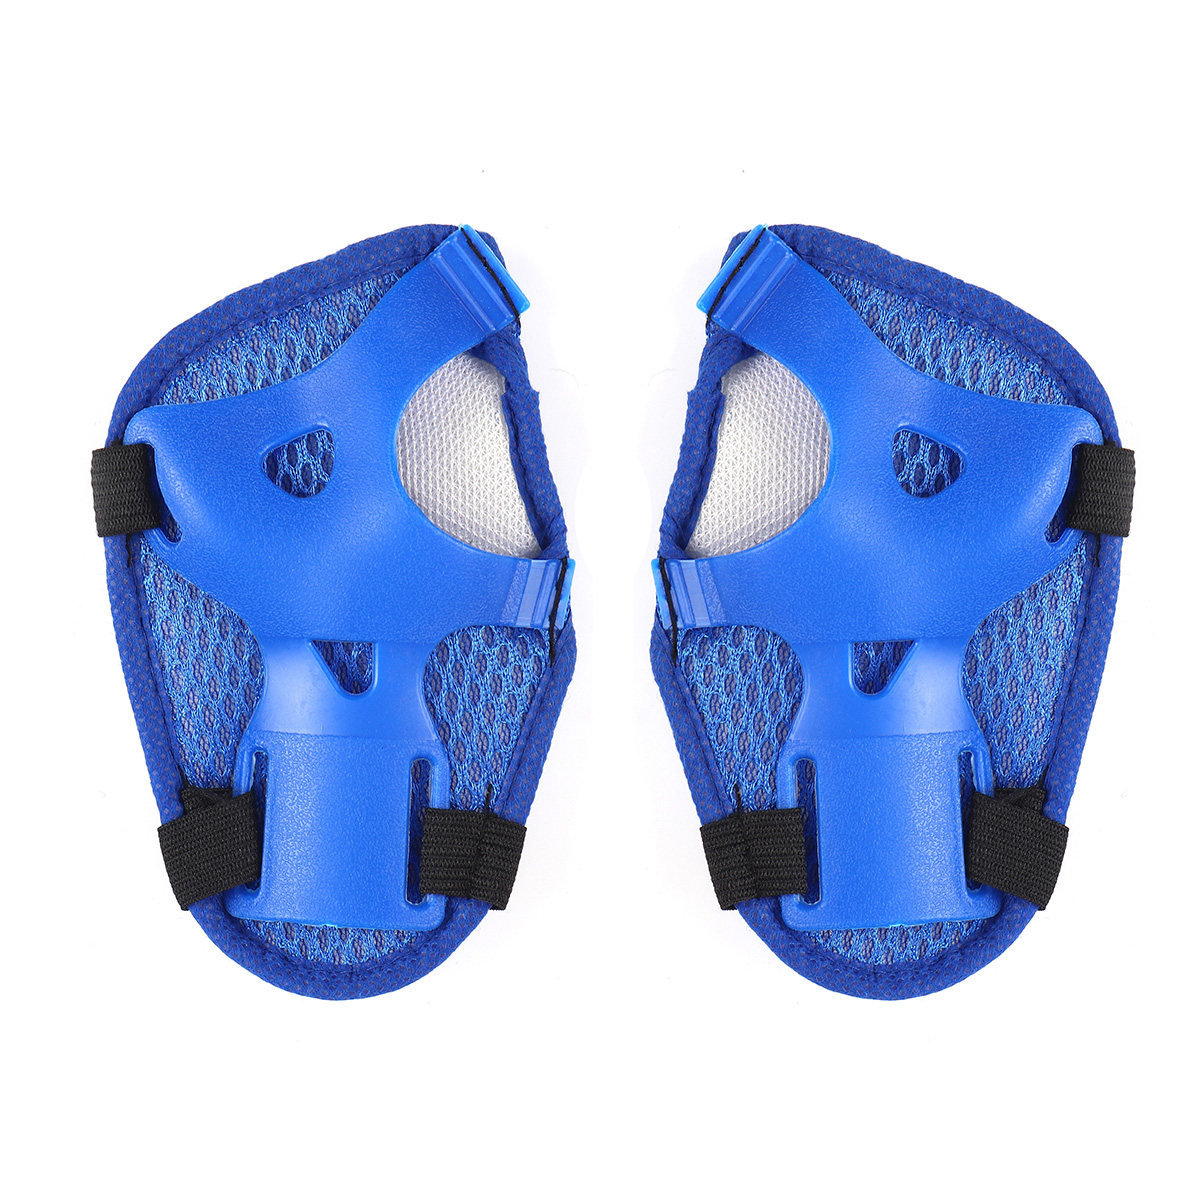 7Pcs-Elbow-Knee-Wrist-Protective-Guard-Elbow-Pads-Safety-Gear-Pad-Wrist-Guard-Skateboard-Protective--1781562-6